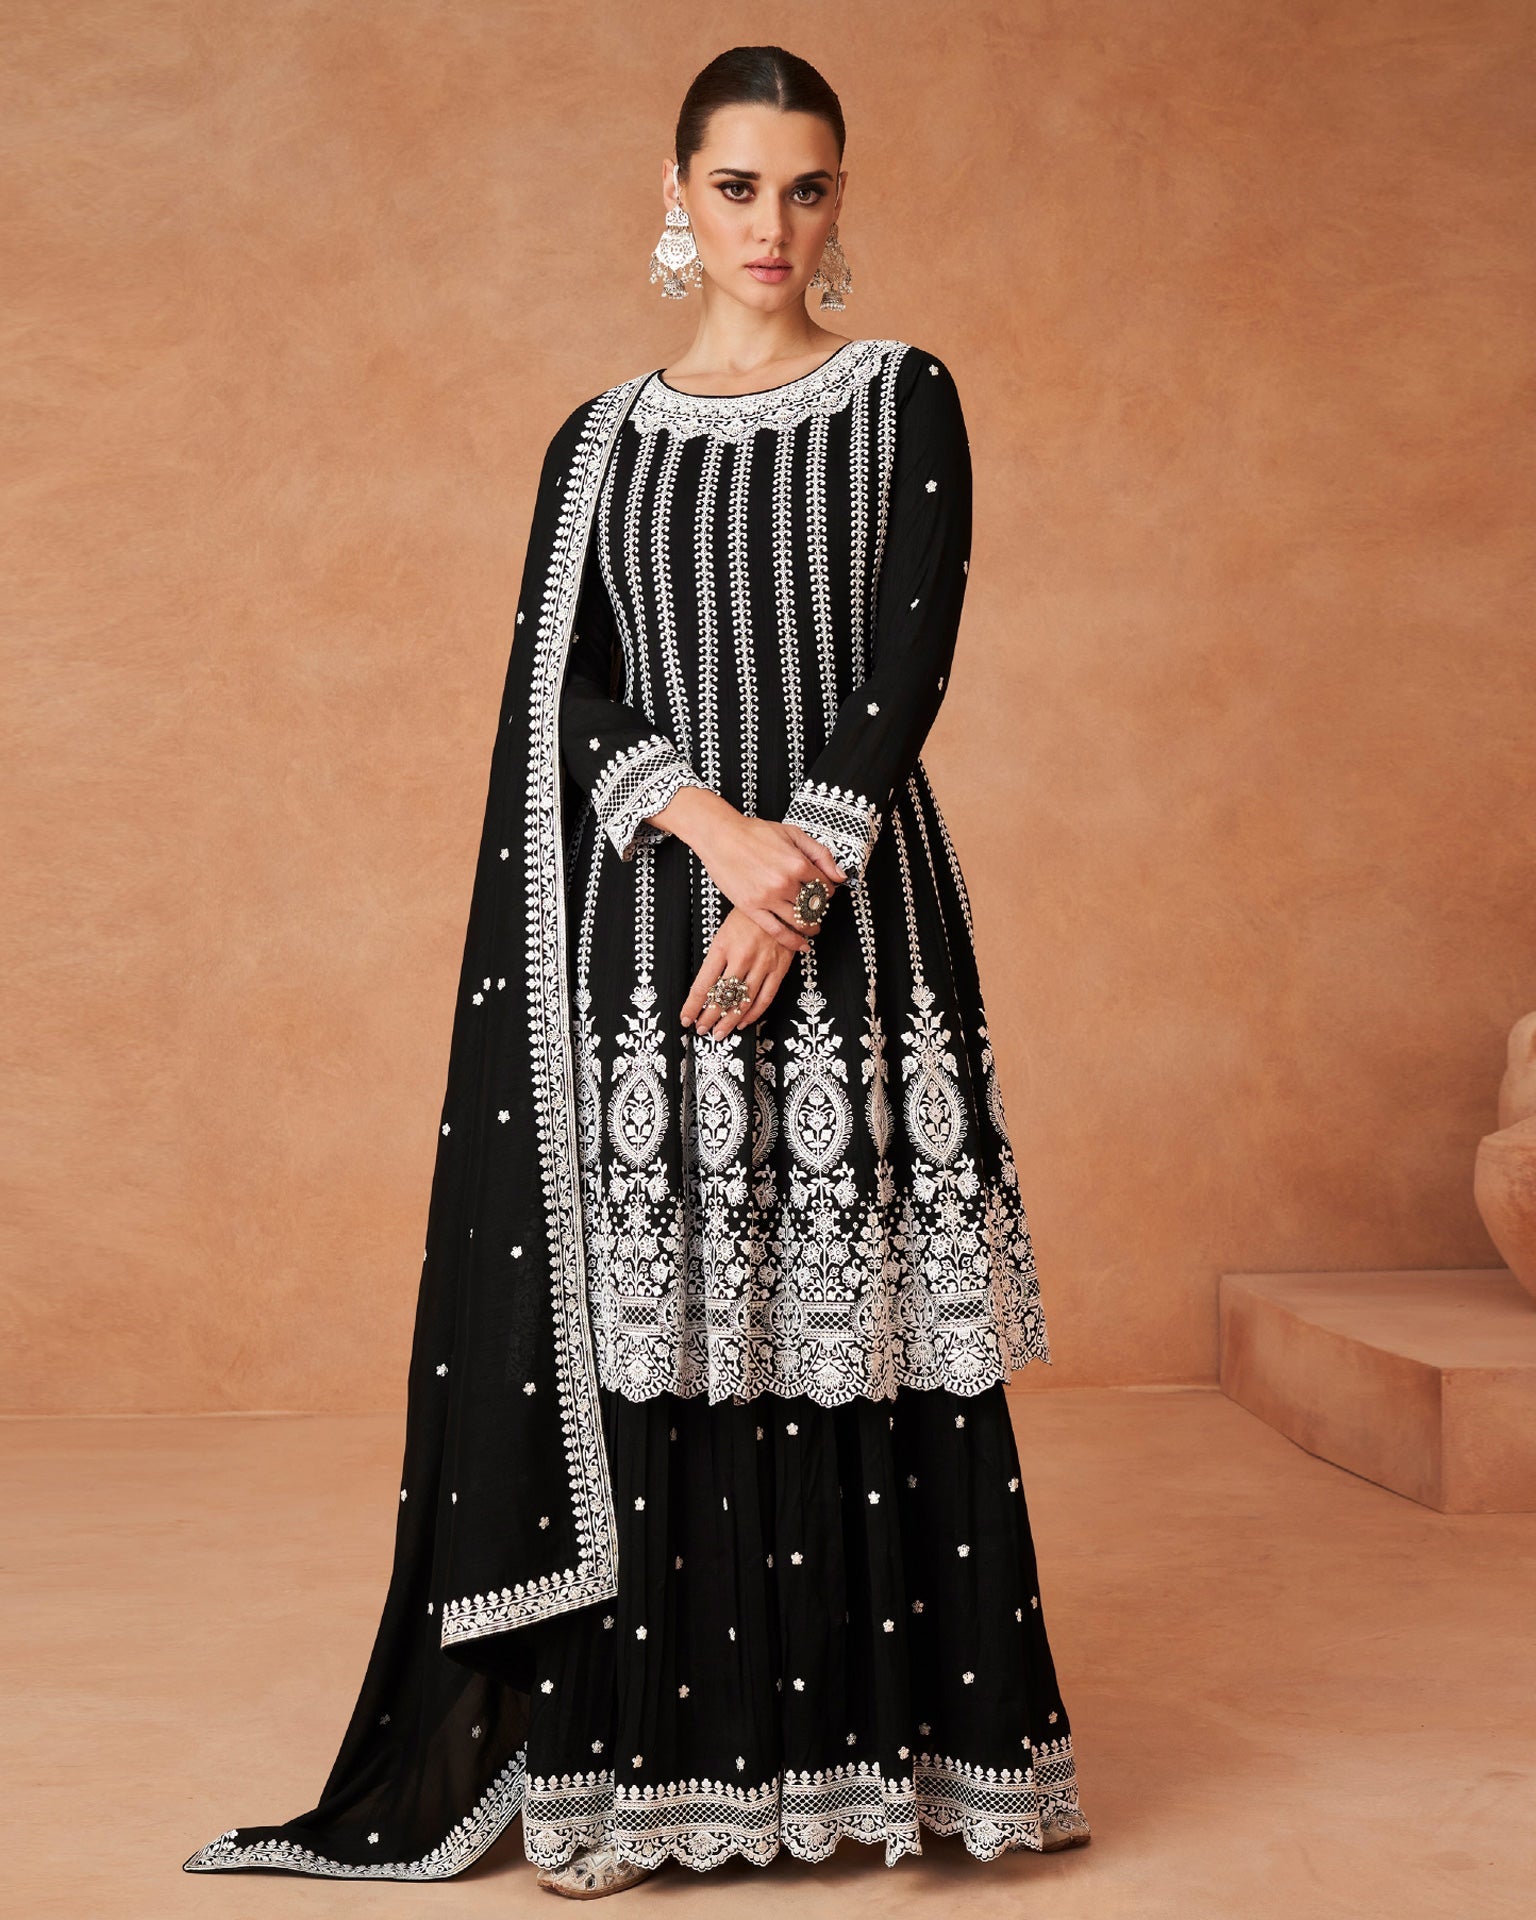 Black Silk Thread Work Frock Suit With Embroidered Black Palazzo